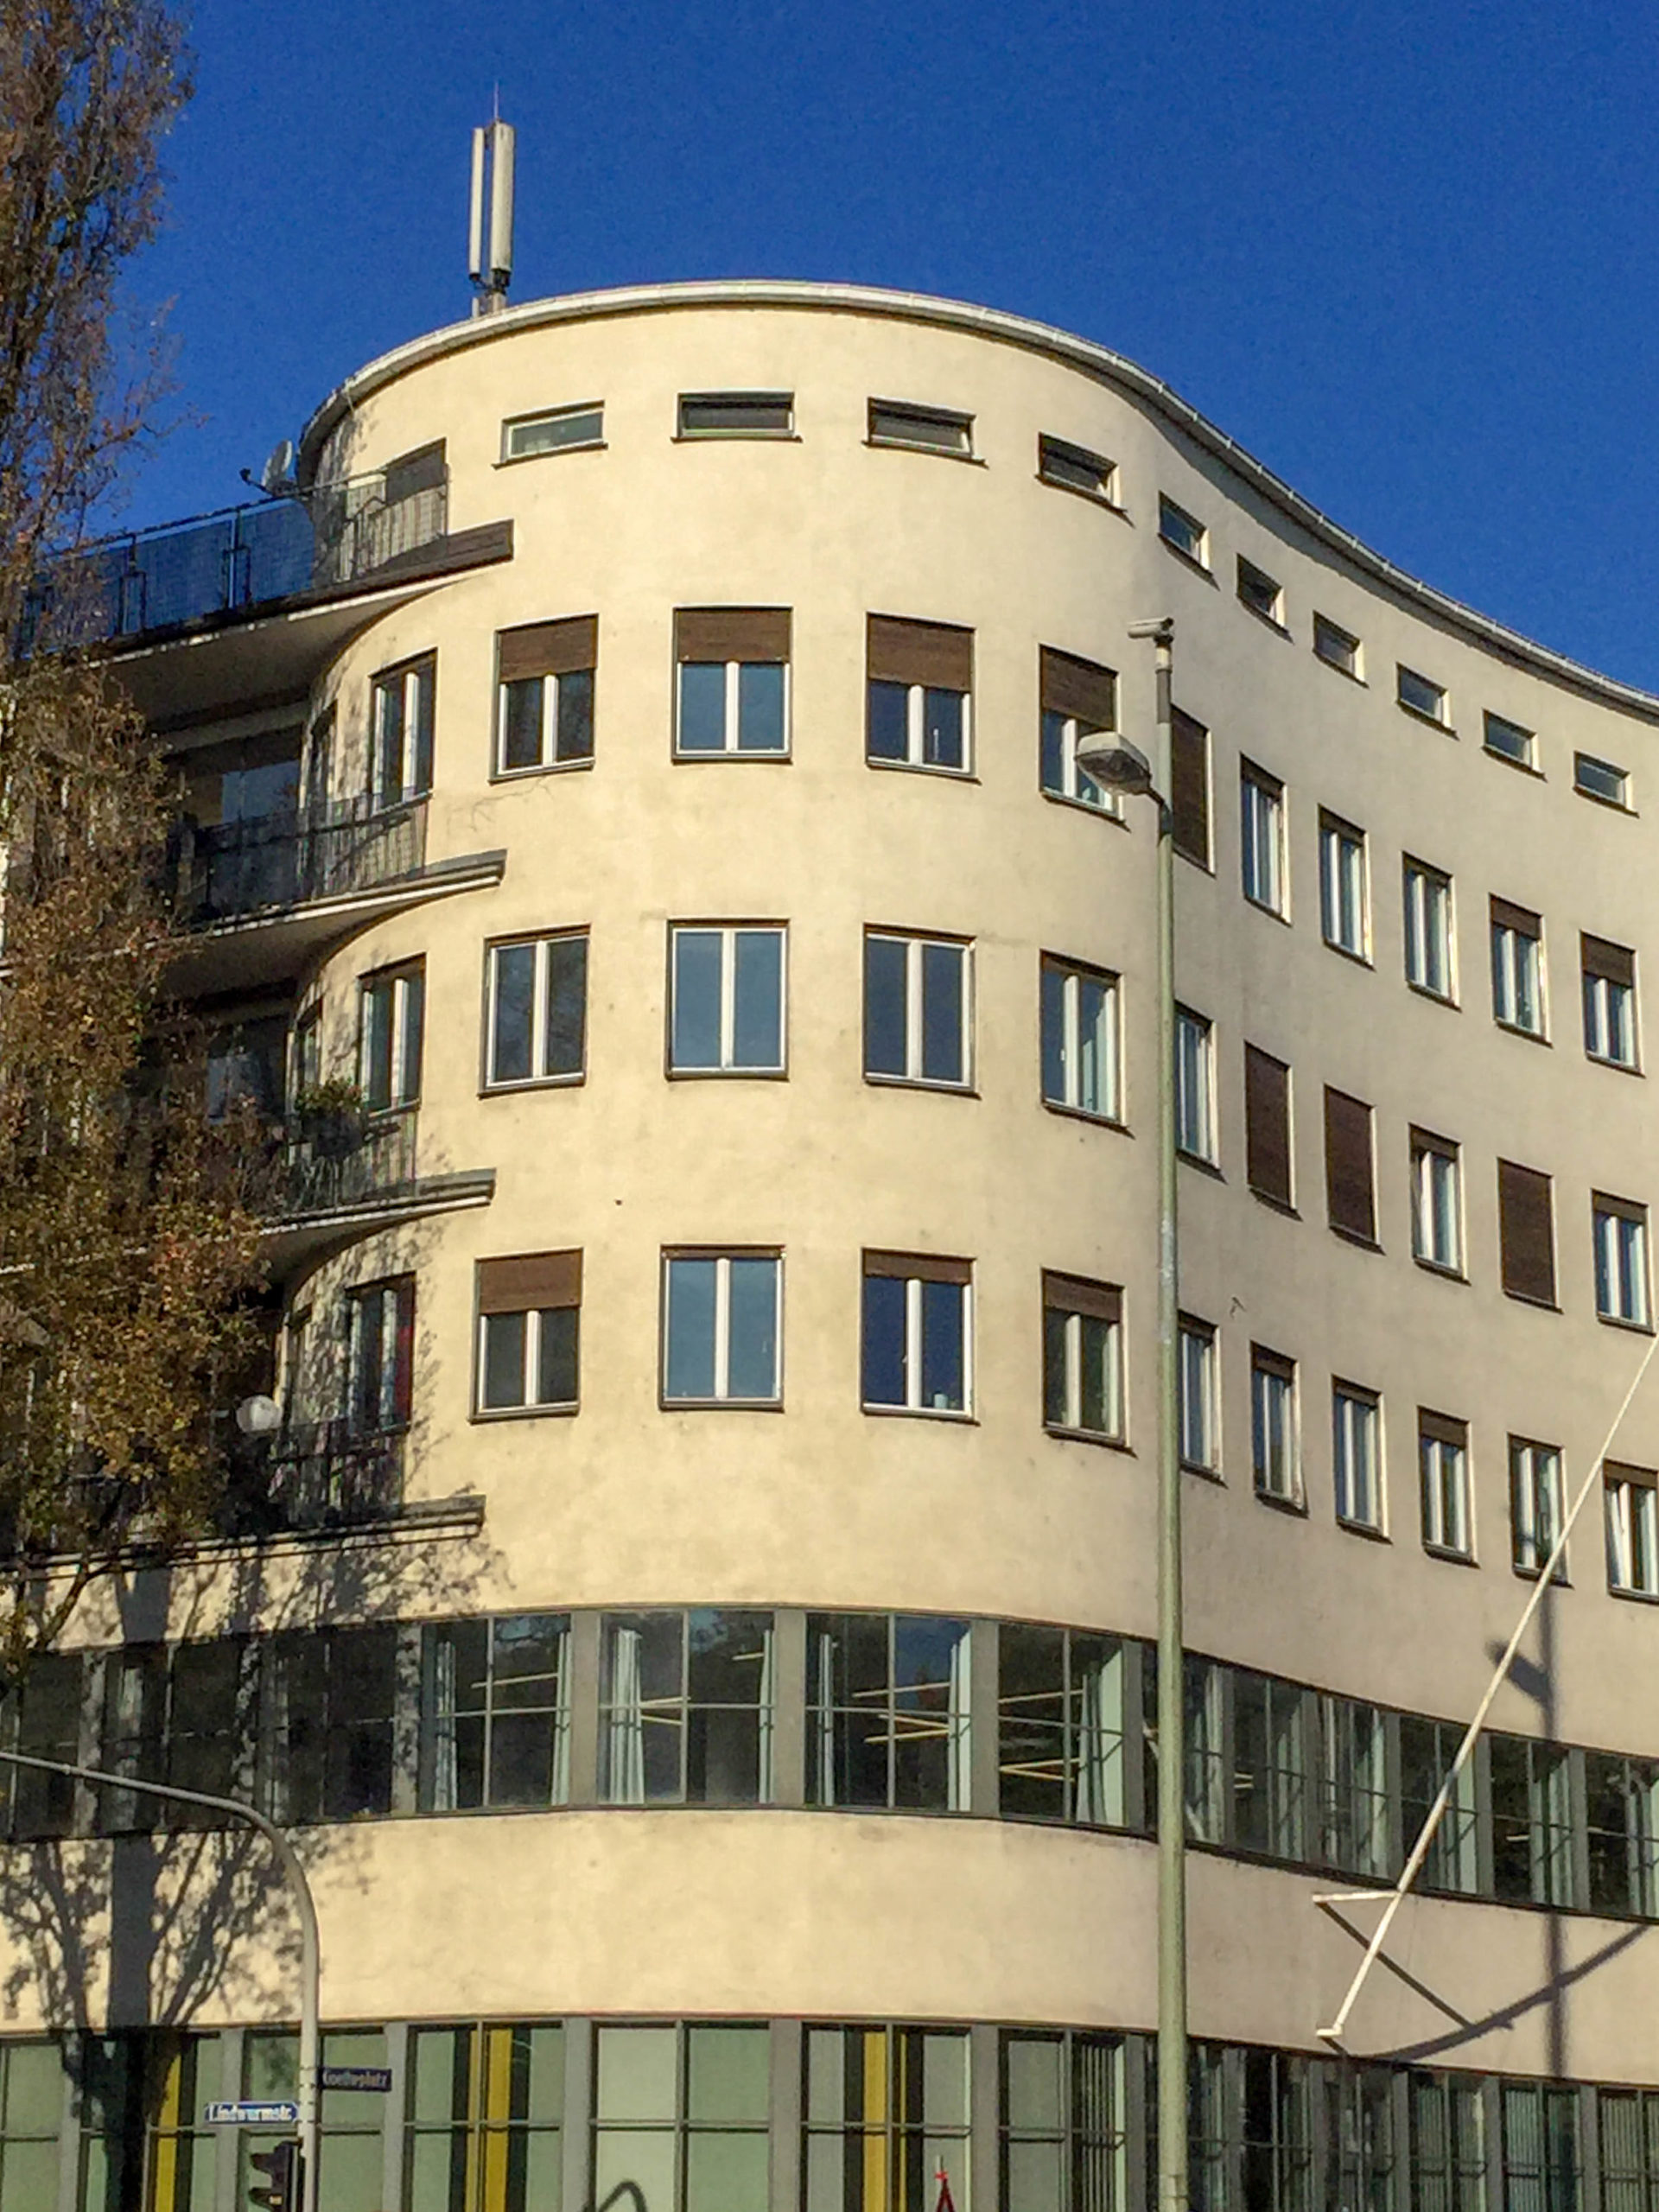 Post office building, 1931-1932. Architects: Franz Holzhammer, Walther Schmidt